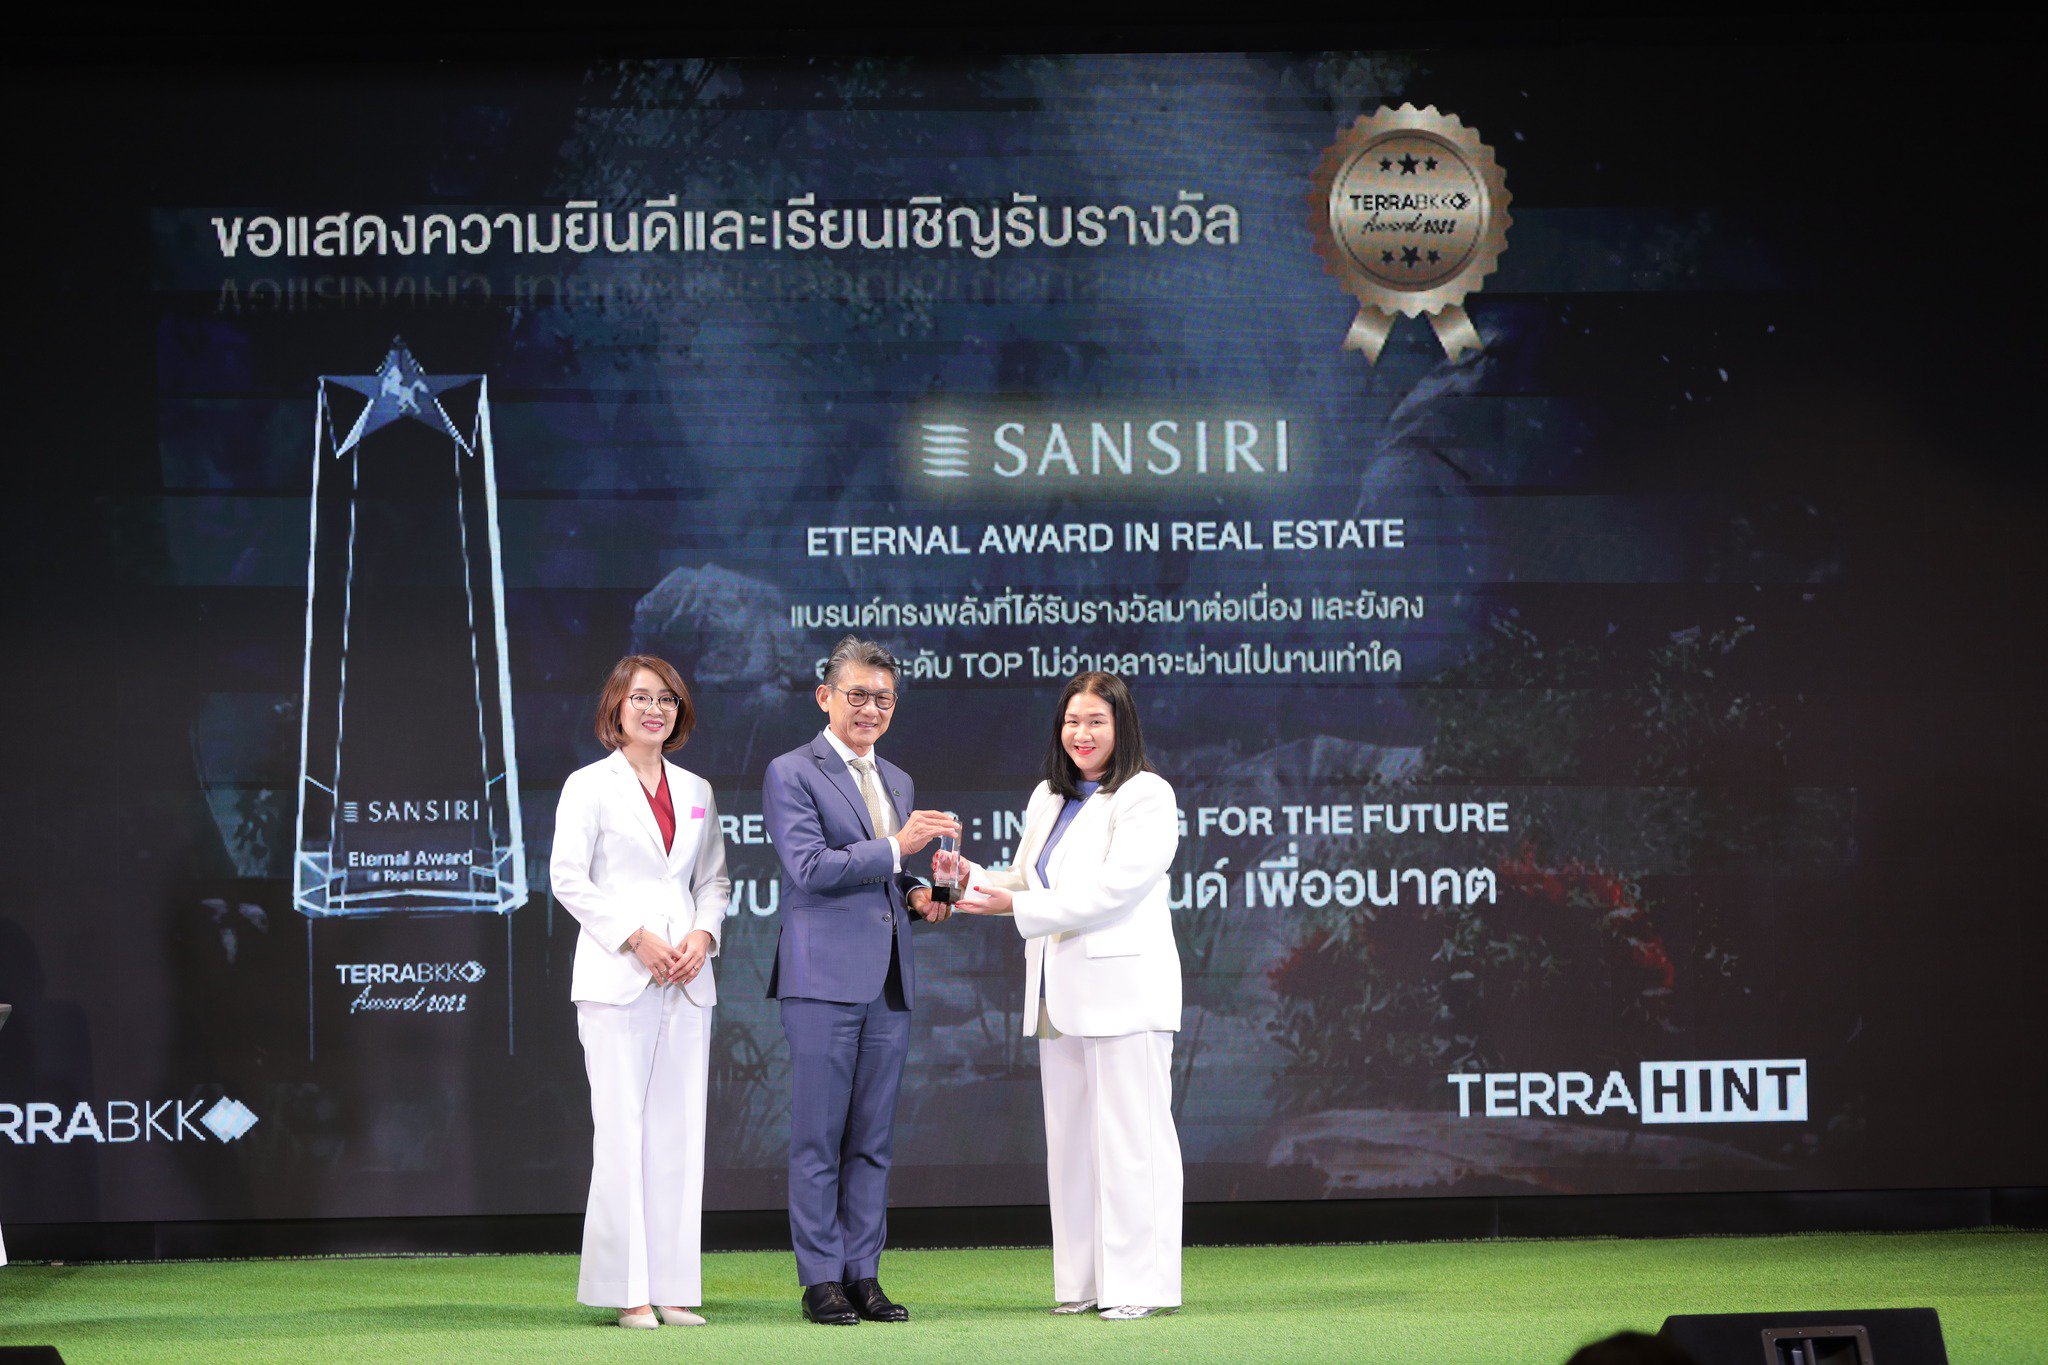 Sansiri Dubbed “Most Powerful” Brand for 5 Consecutive Years, Achieves “Legendary” Status in Thai Real-Estate Industry Sansiri Public Company Limited, Thailand's leading real-estate developer, was awarded for being the number one brand in the heart of consumers for five consecutive years